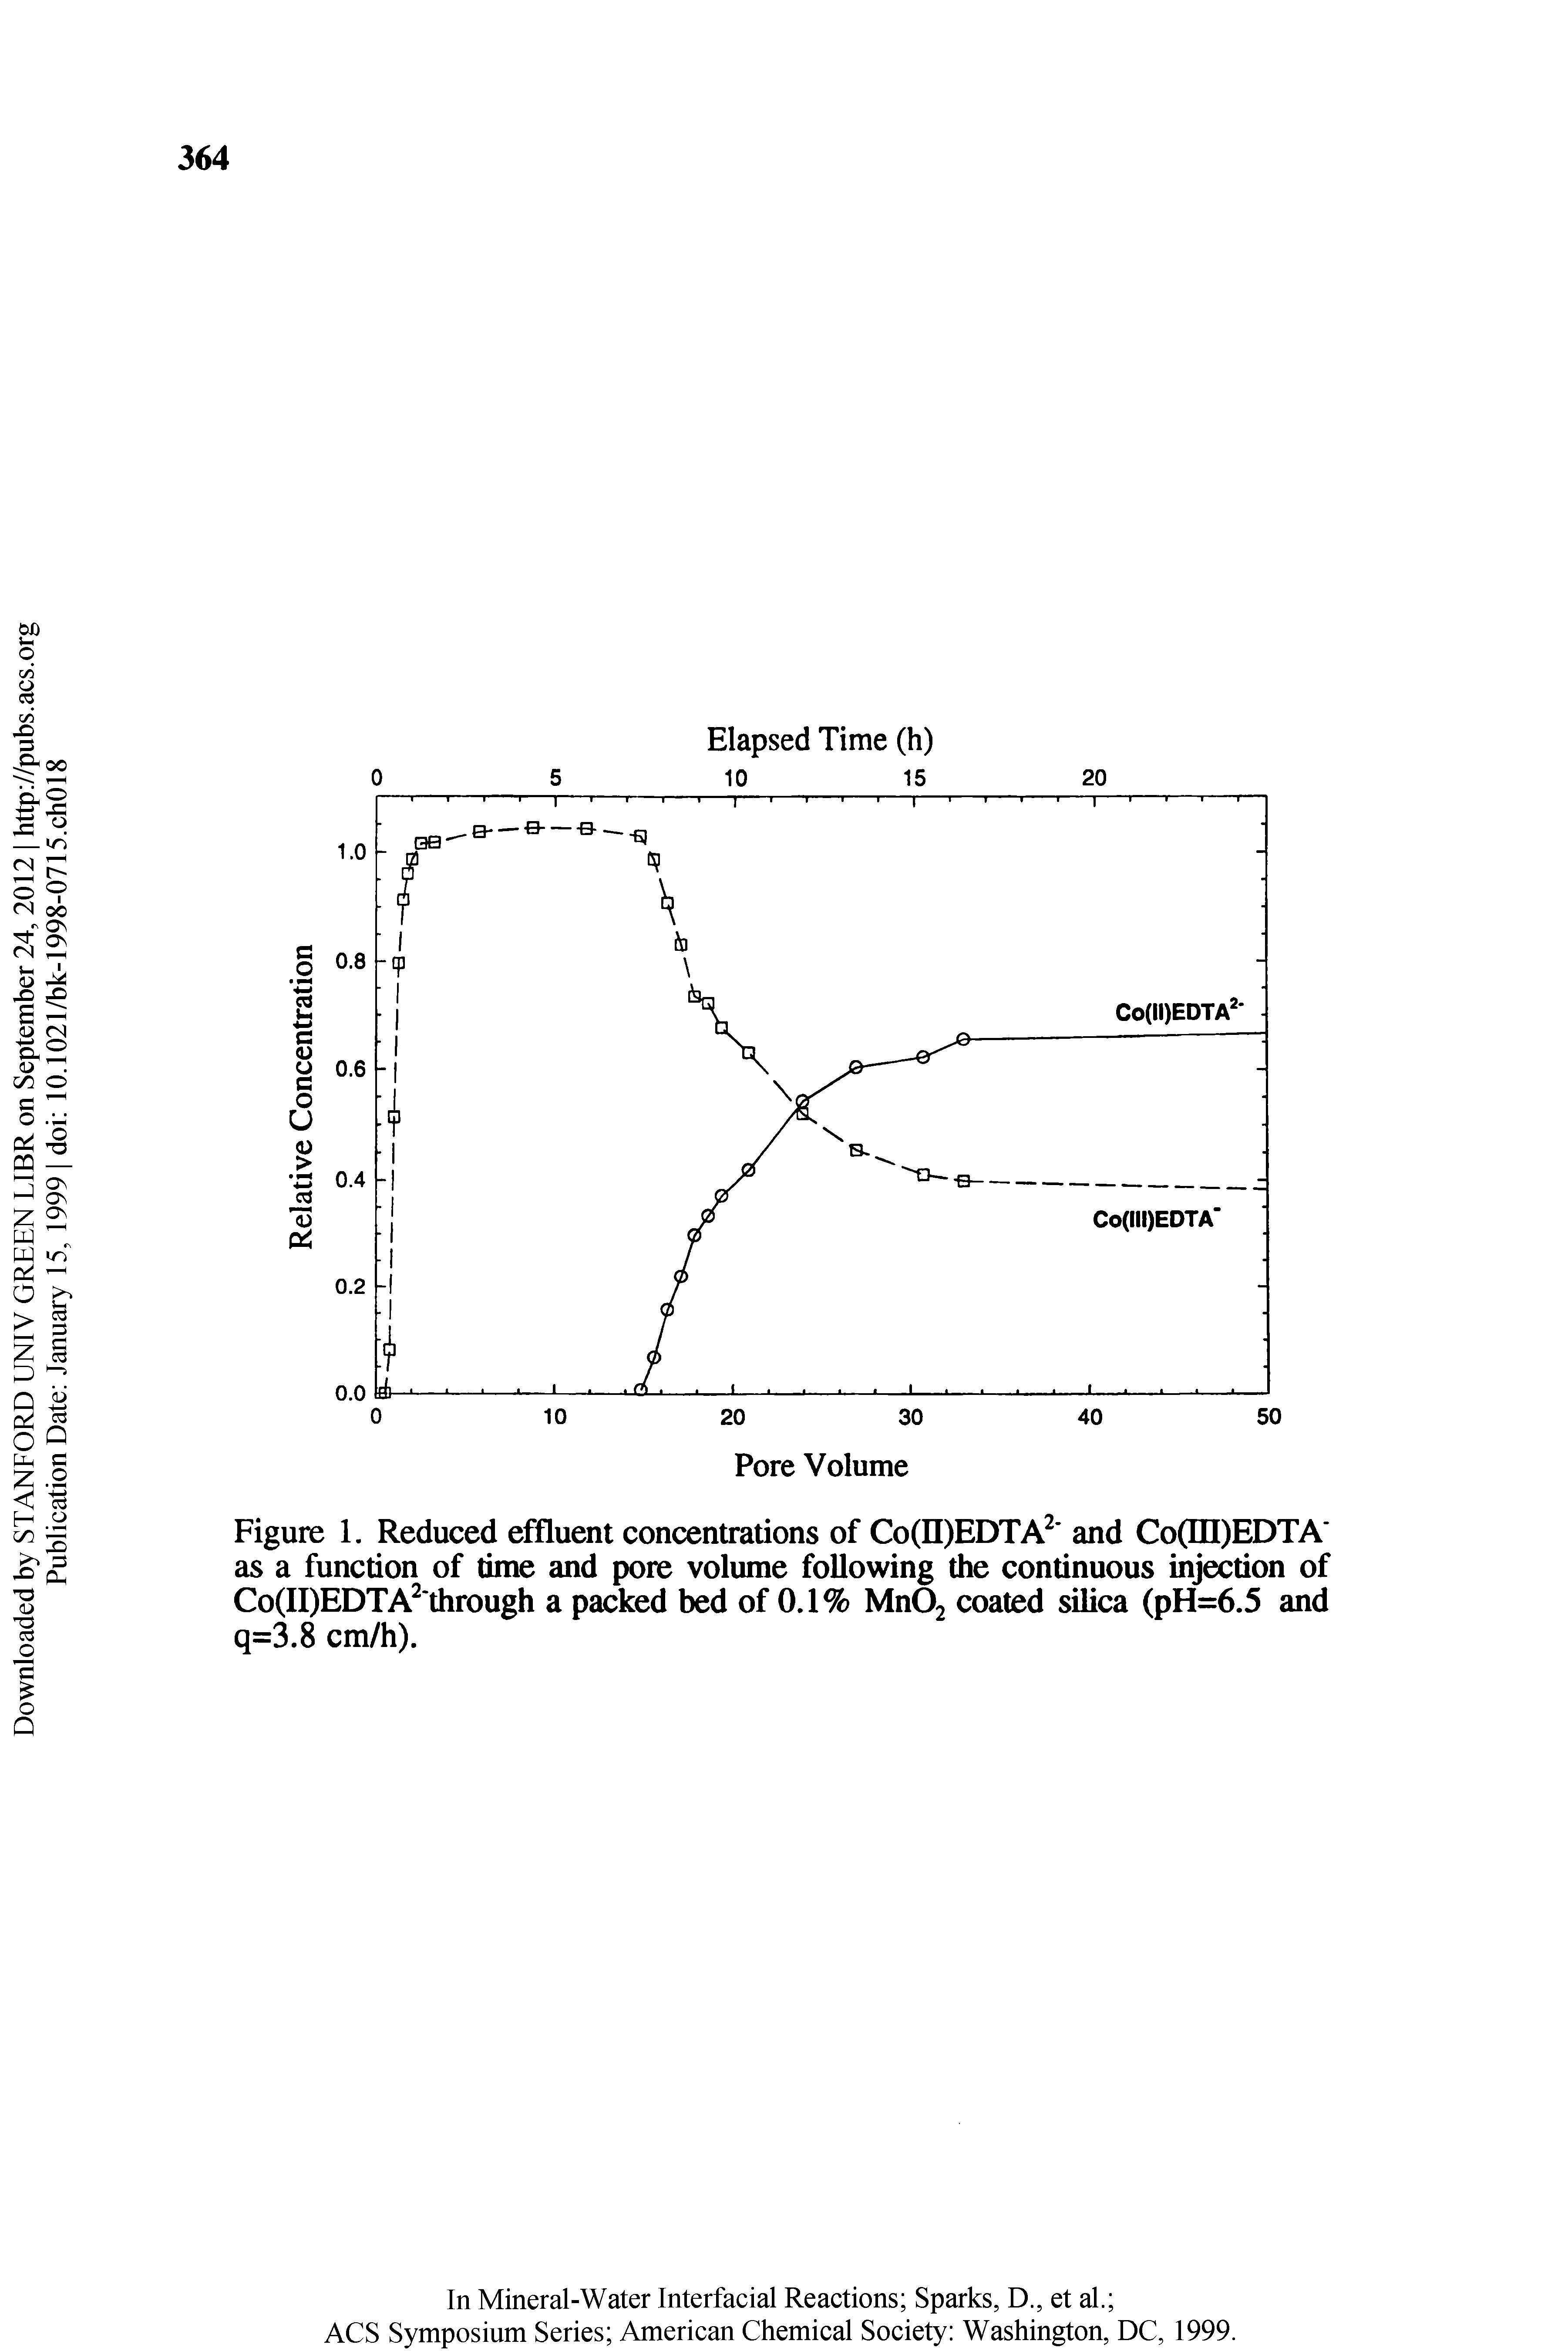 Figure 1. Reduced effluent concentrations of Co(II)EDTA and Co(ffl)EDTA as a function of time and pore volume following the continuous injection of Co(II)EDTA through a packed bed of 0.1% MnOj coated silica (pH=6.5 and q=3.8 cm/h).